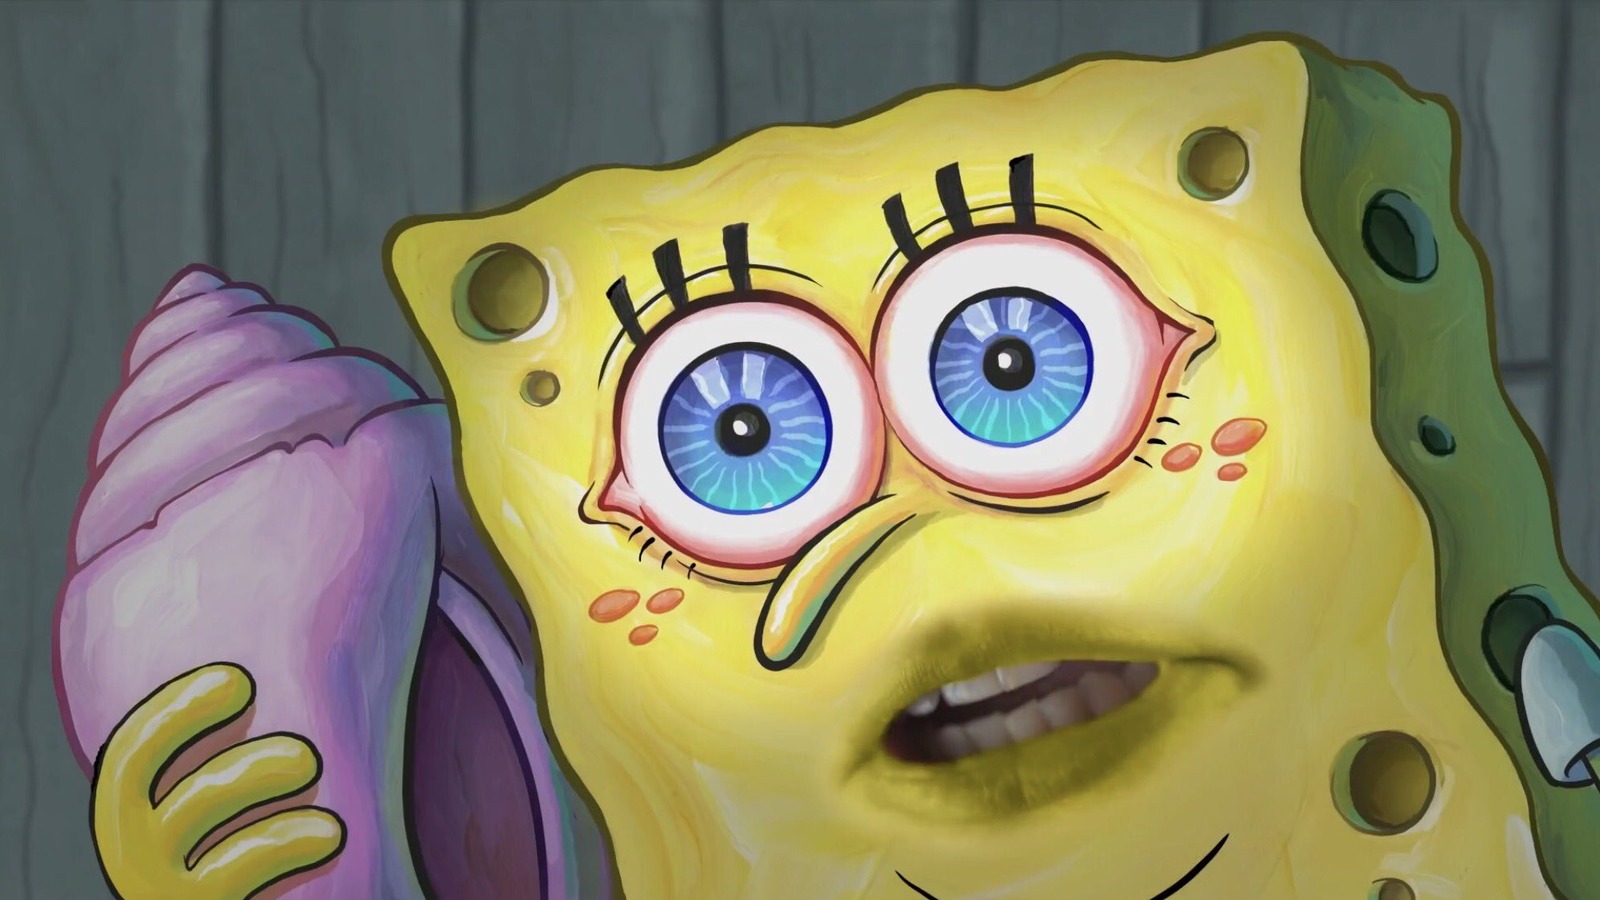 23 SpongeBob Reactions For Everyday Situations  Spongebob faces, Spongebob,  Funny spongebob faces